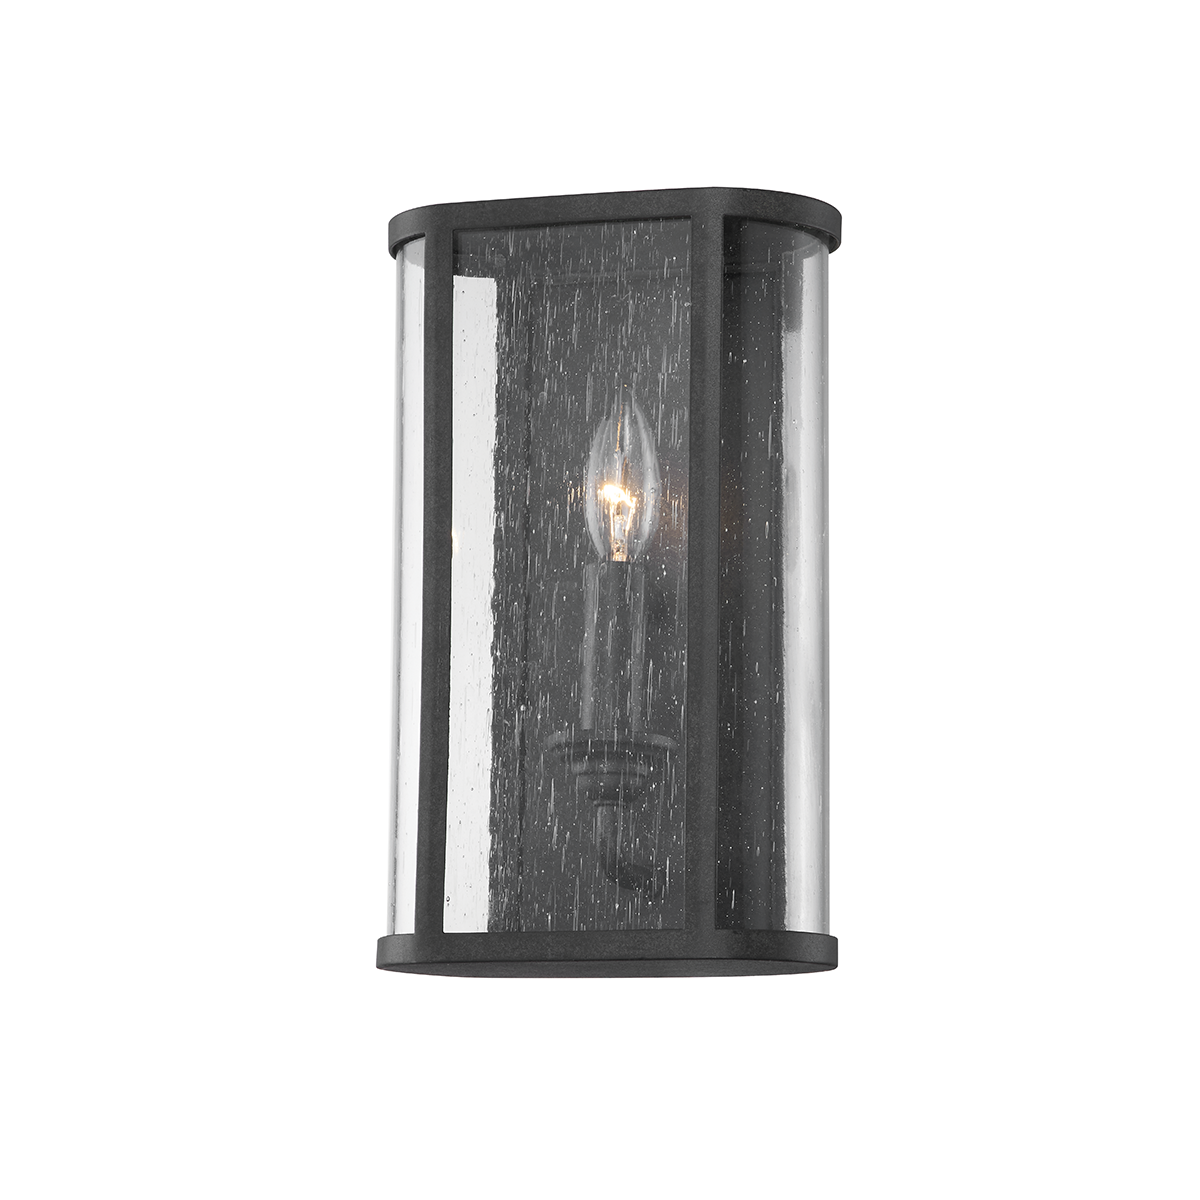 Troy Lighting 1 LIGHT SMALL EXTERIOR WALL SCONCE B3401